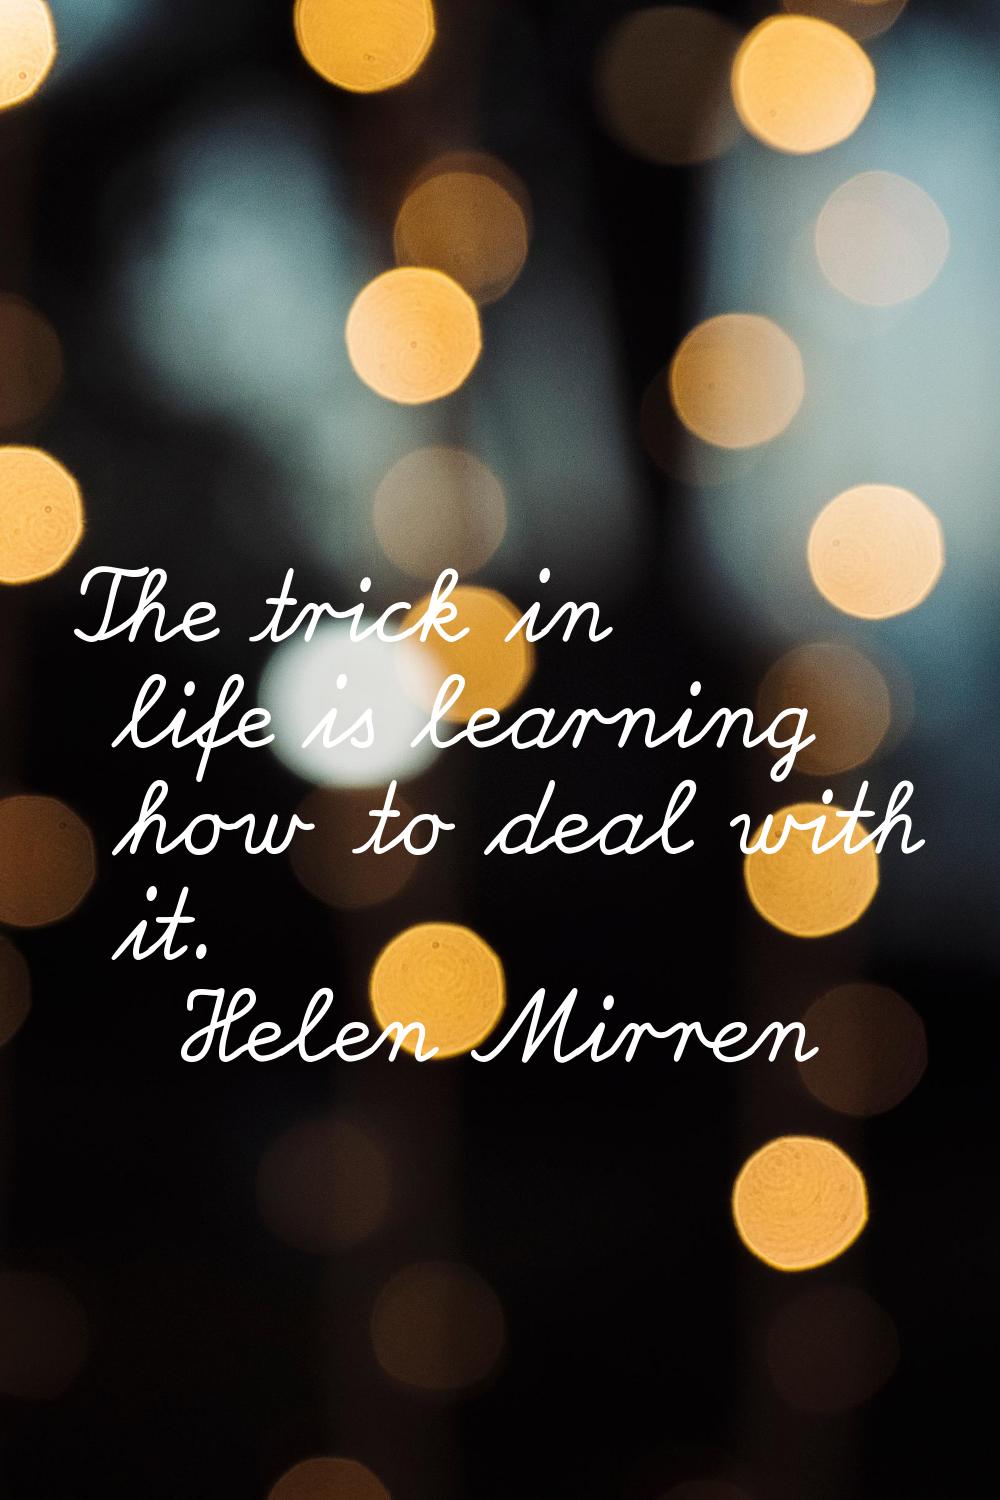 The trick in life is learning how to deal with it.